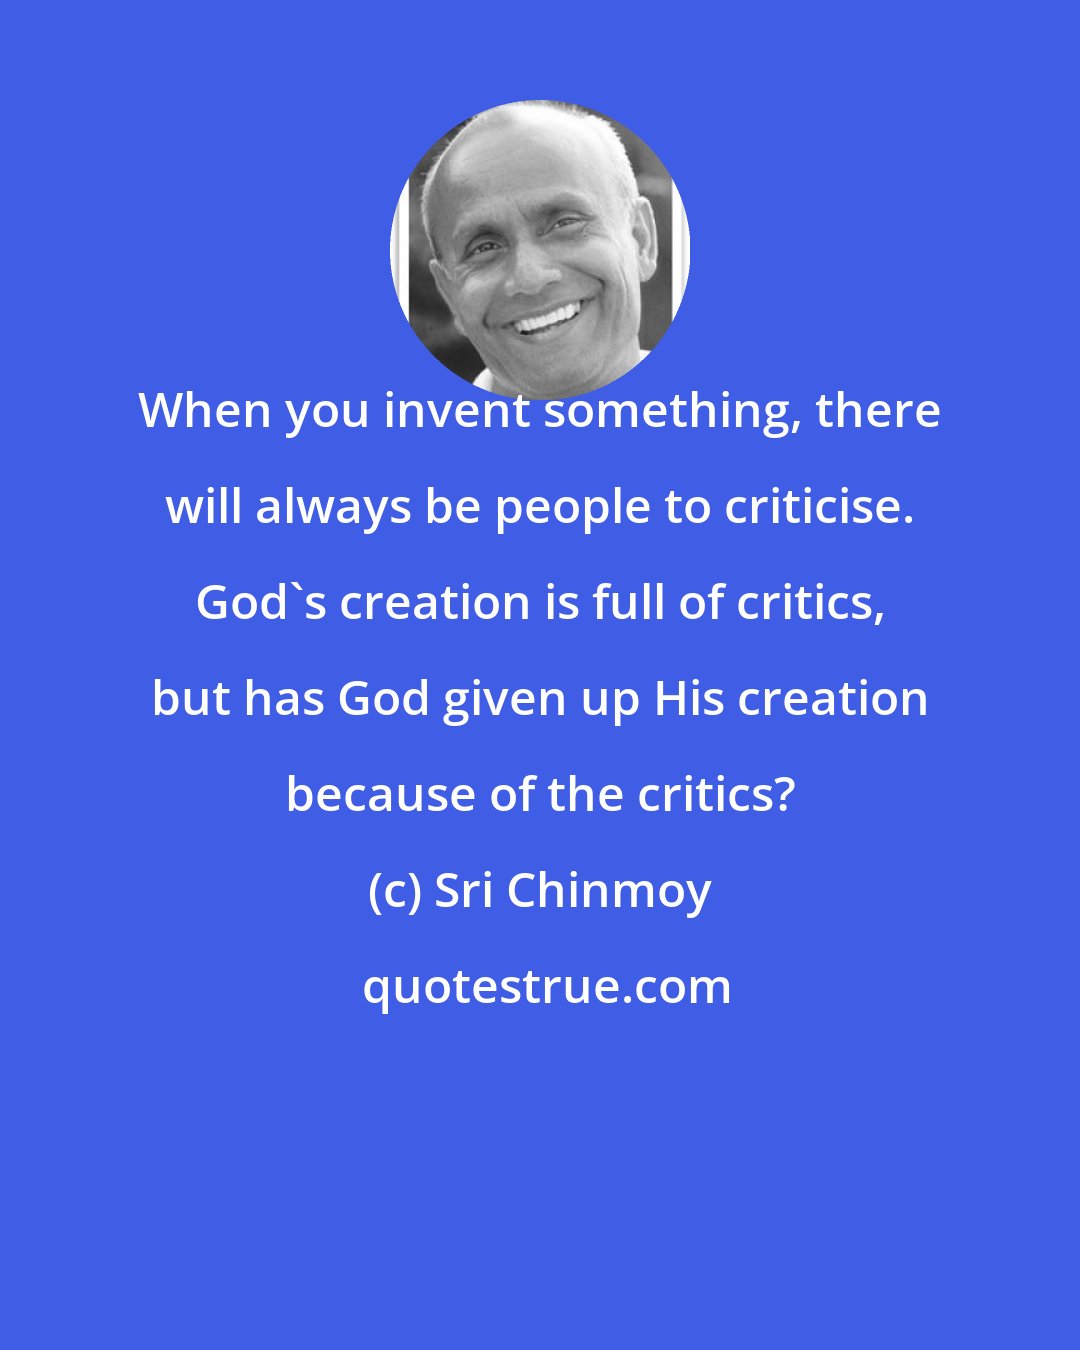 Sri Chinmoy: When you invent something, there will always be people to criticise. God's creation is full of critics, but has God given up His creation because of the critics?